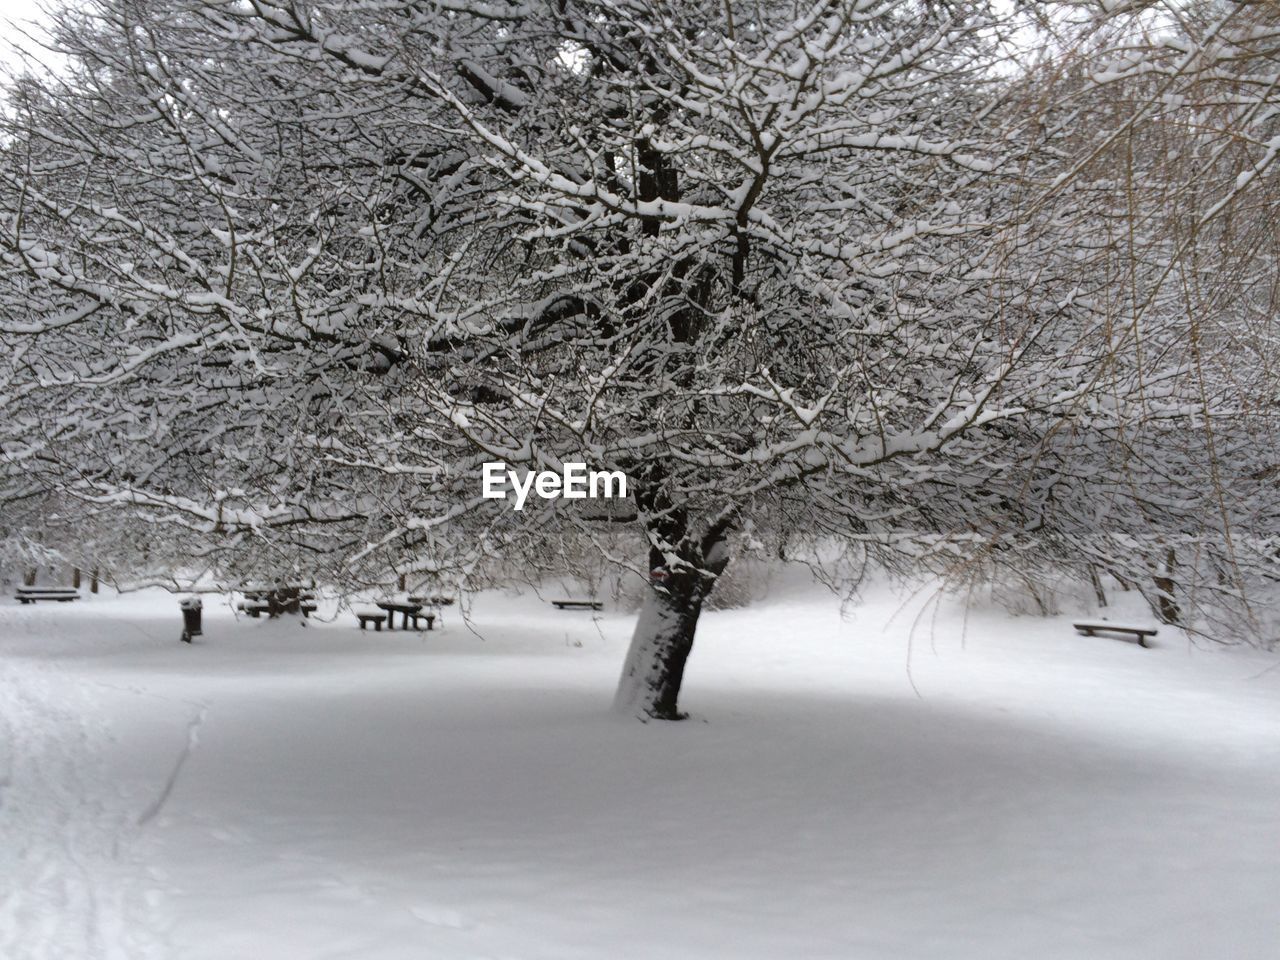 SNOW COVERED TREES ON LANDSCAPE